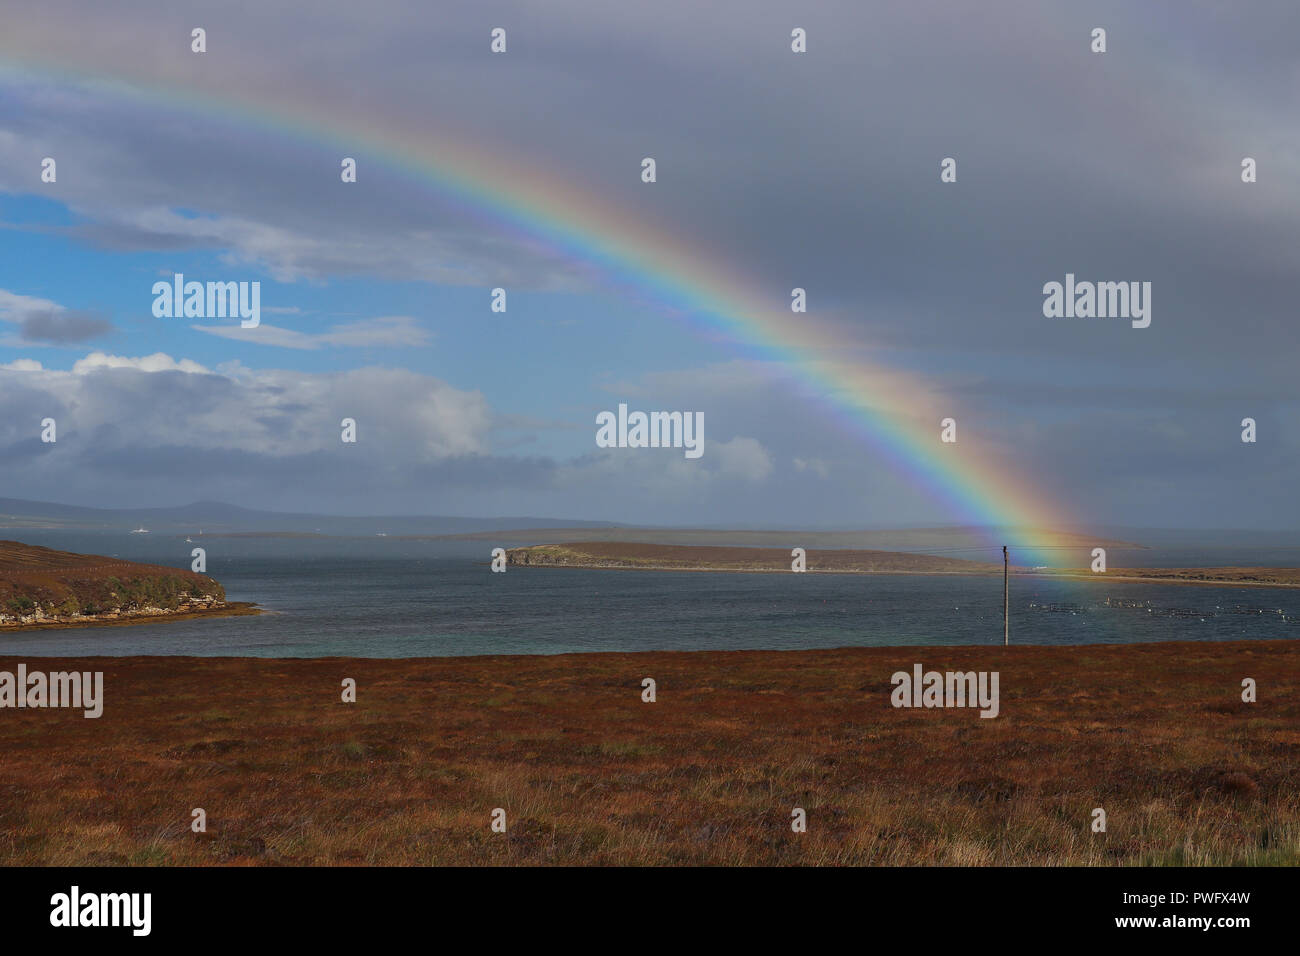 Gorgeous rainbow (double!) over Wide Firth, Orkney Mainland, Scotland, on a blustery, on and off rainy day. Blue sky, gray clouds, sea and brown field Stock Photo